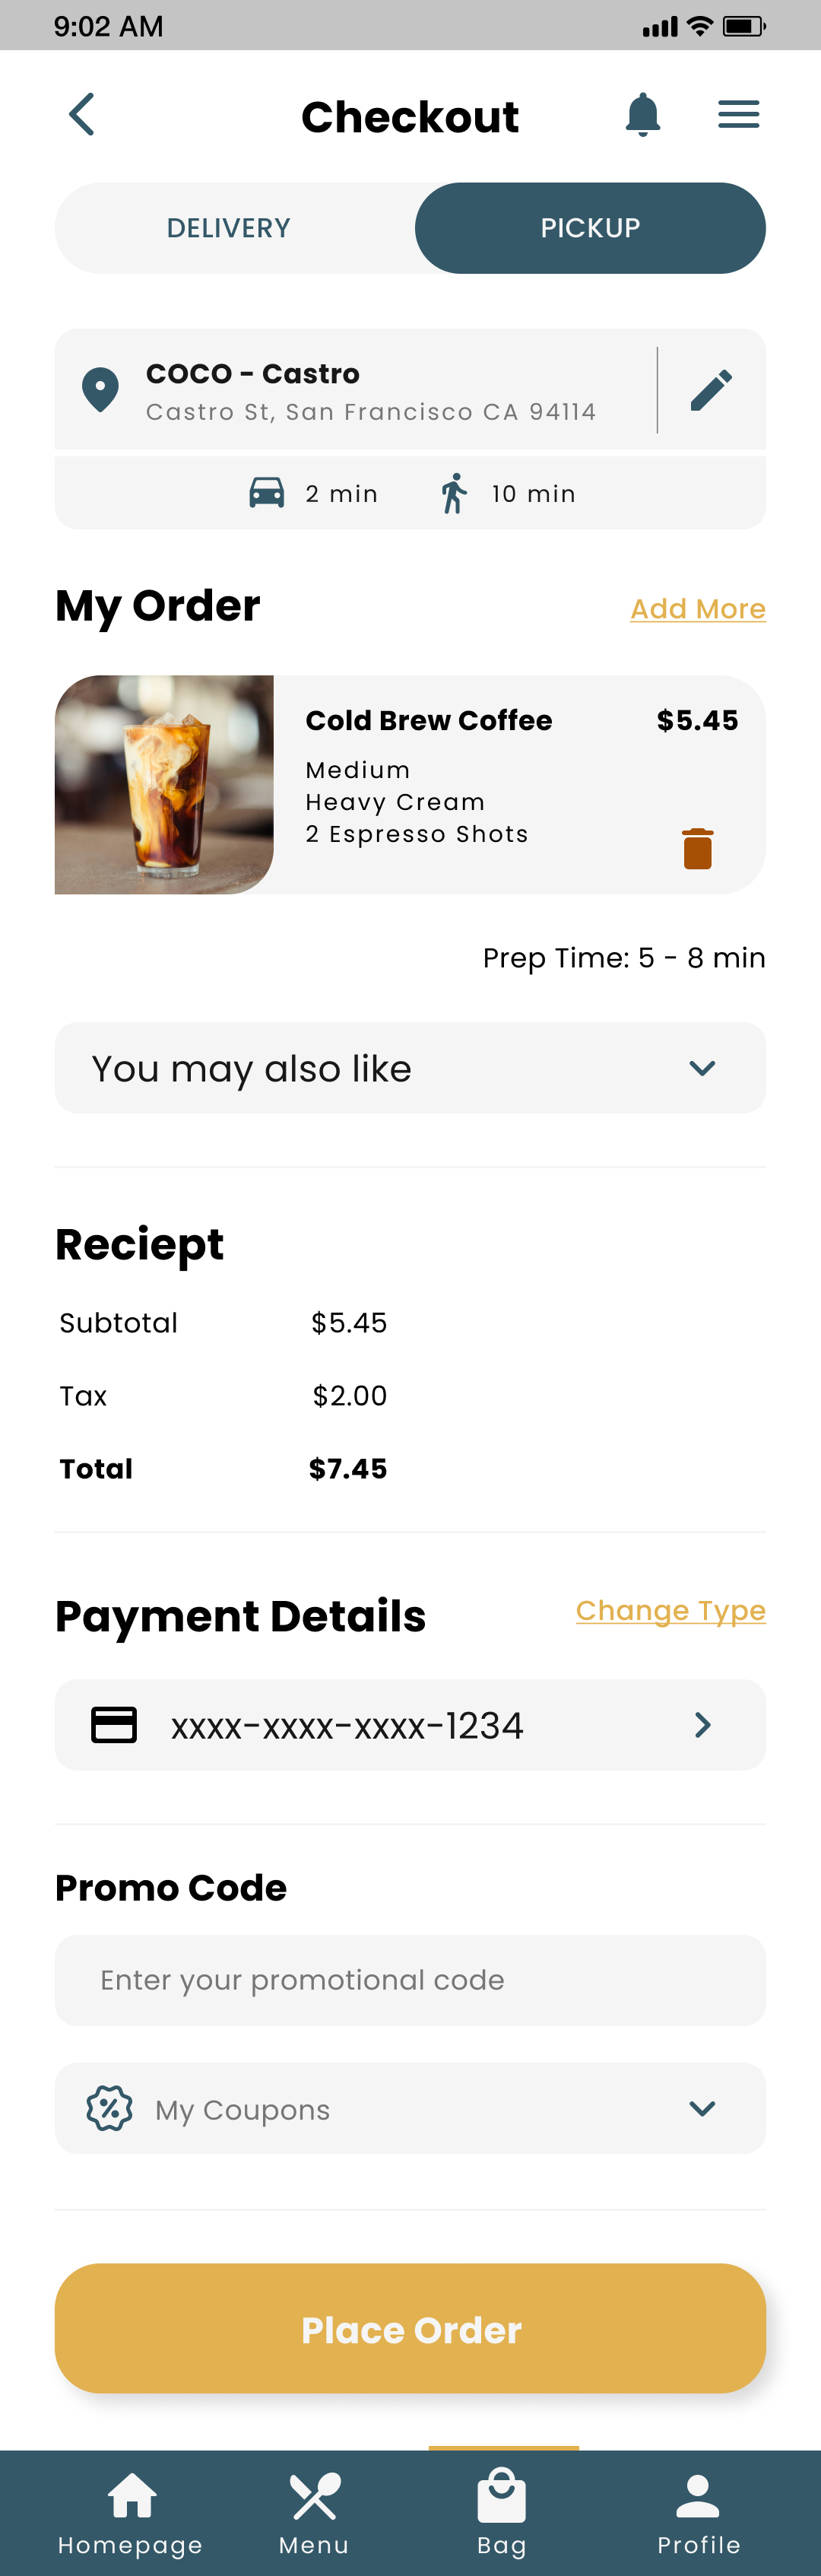 COCO Checkout screen for mobile app